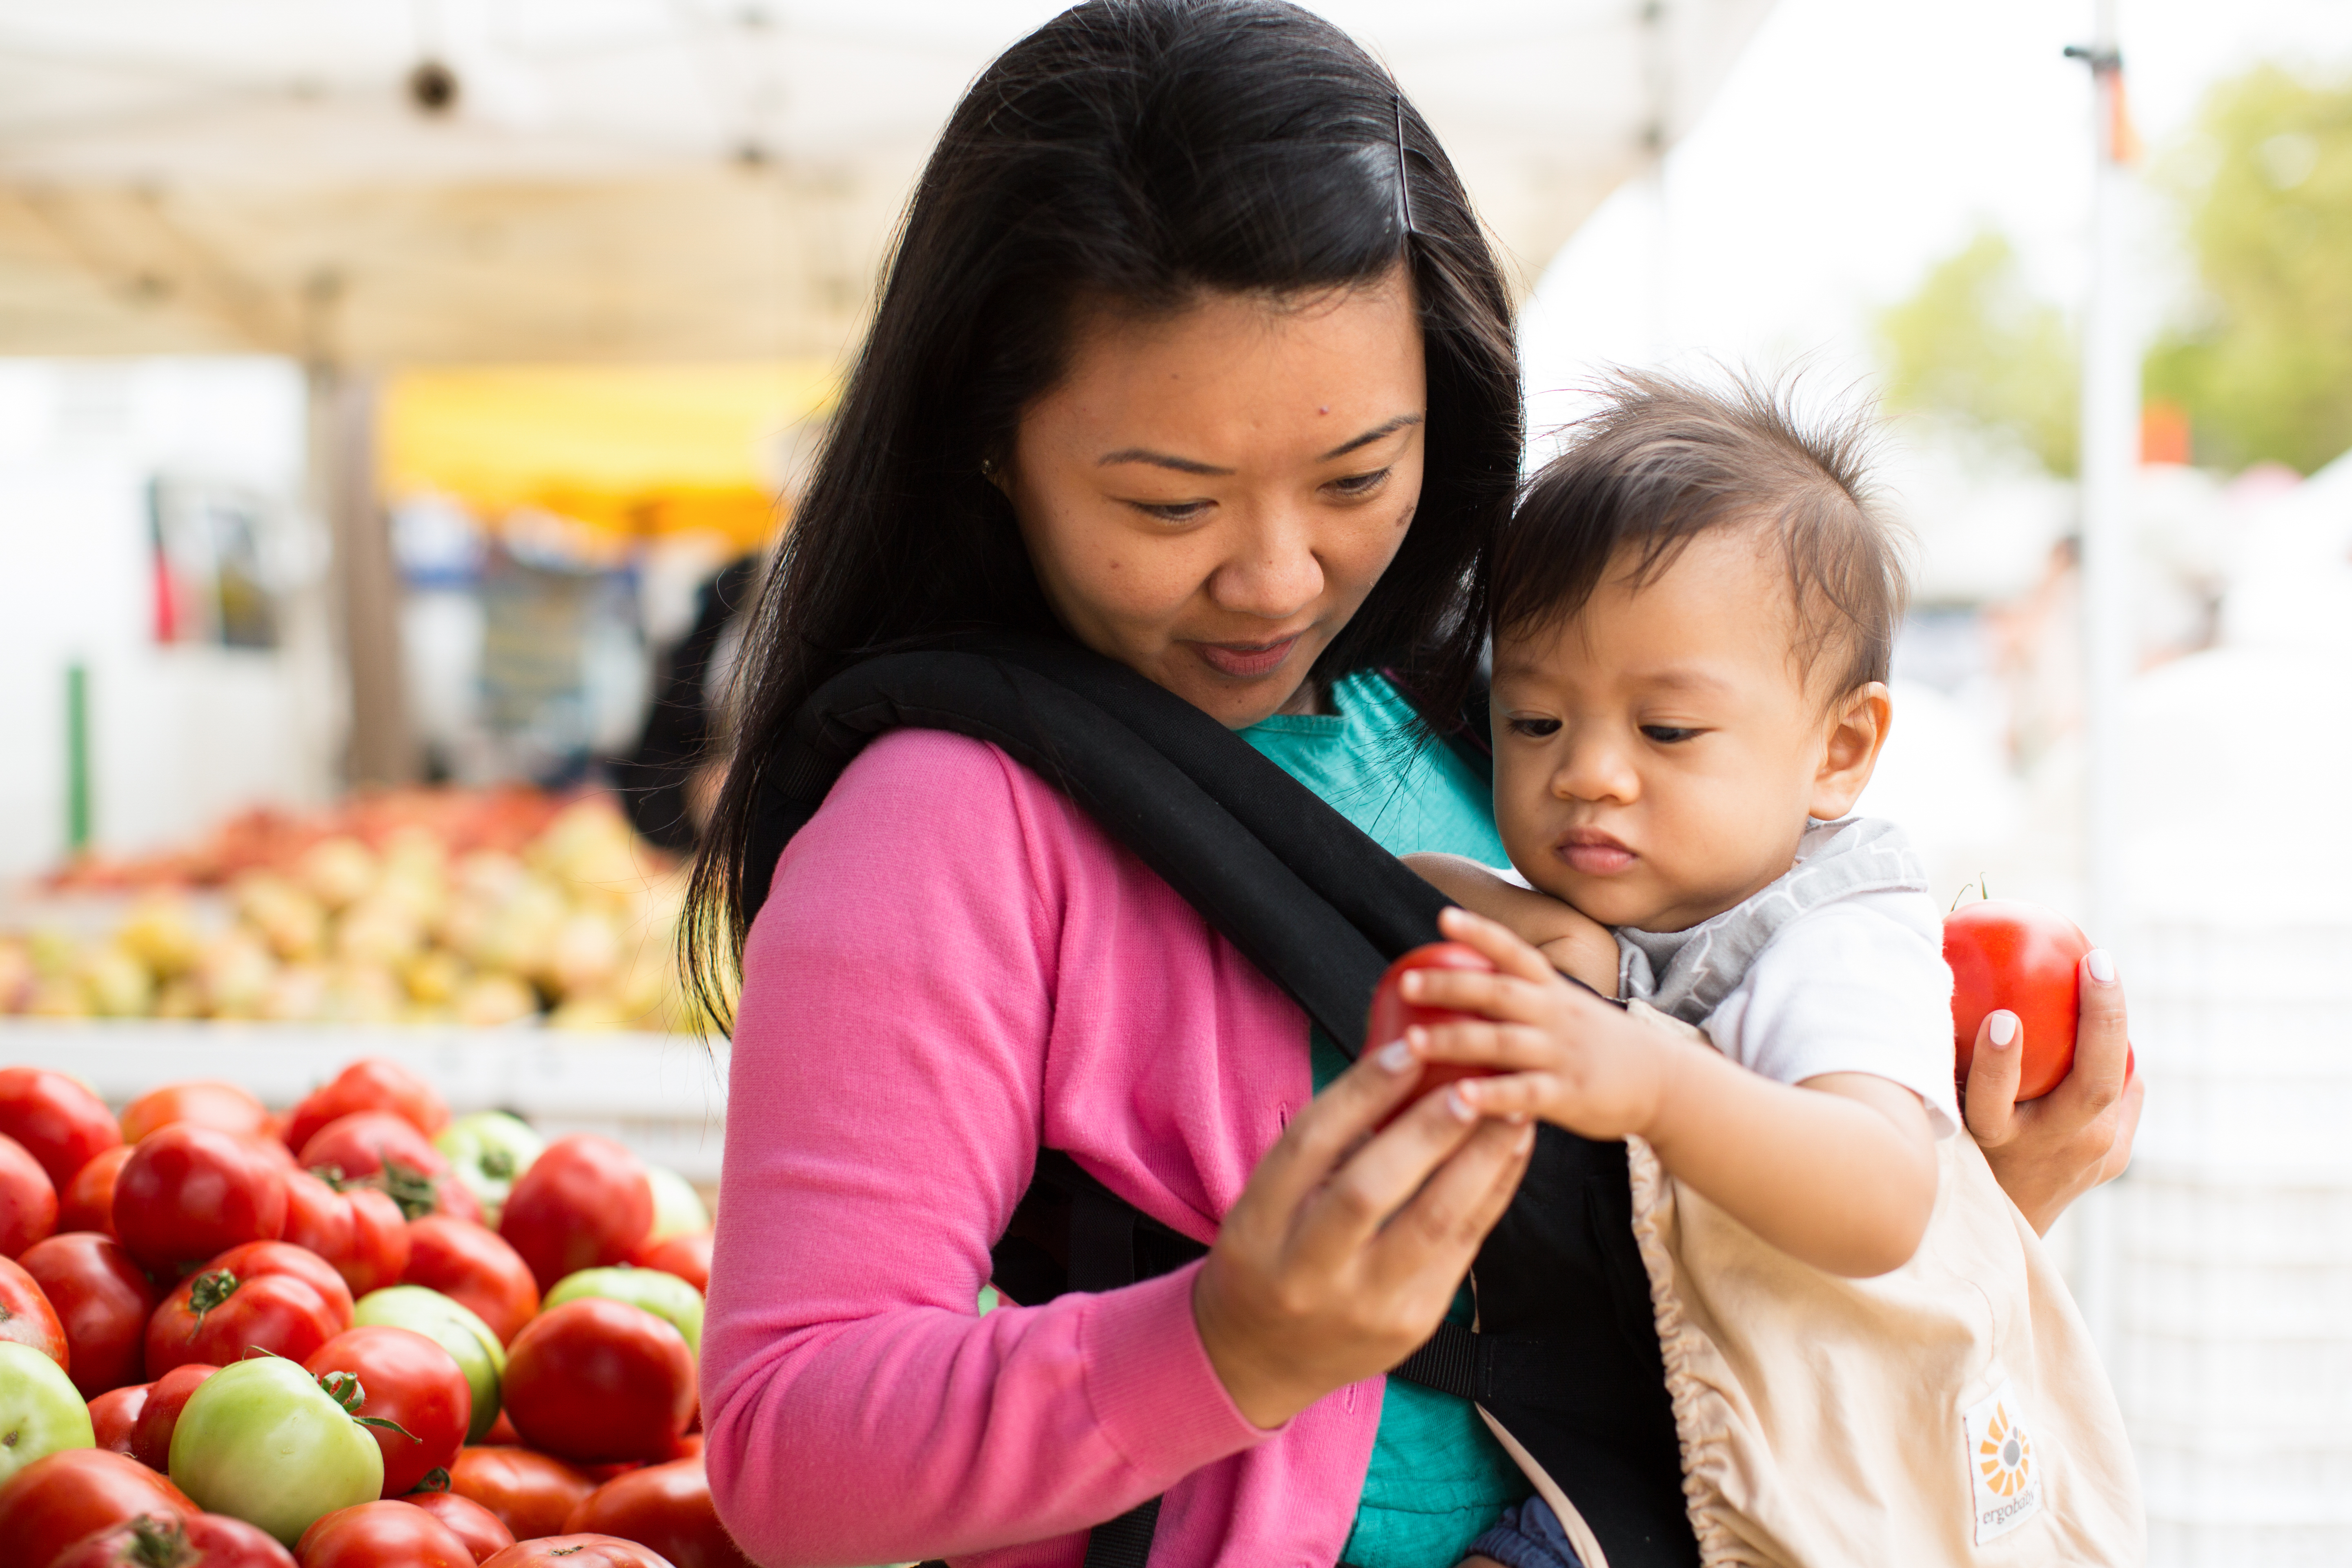 Mother Holding Child in Baby Carrier Looking at Tomatoes at the Farmer's Market